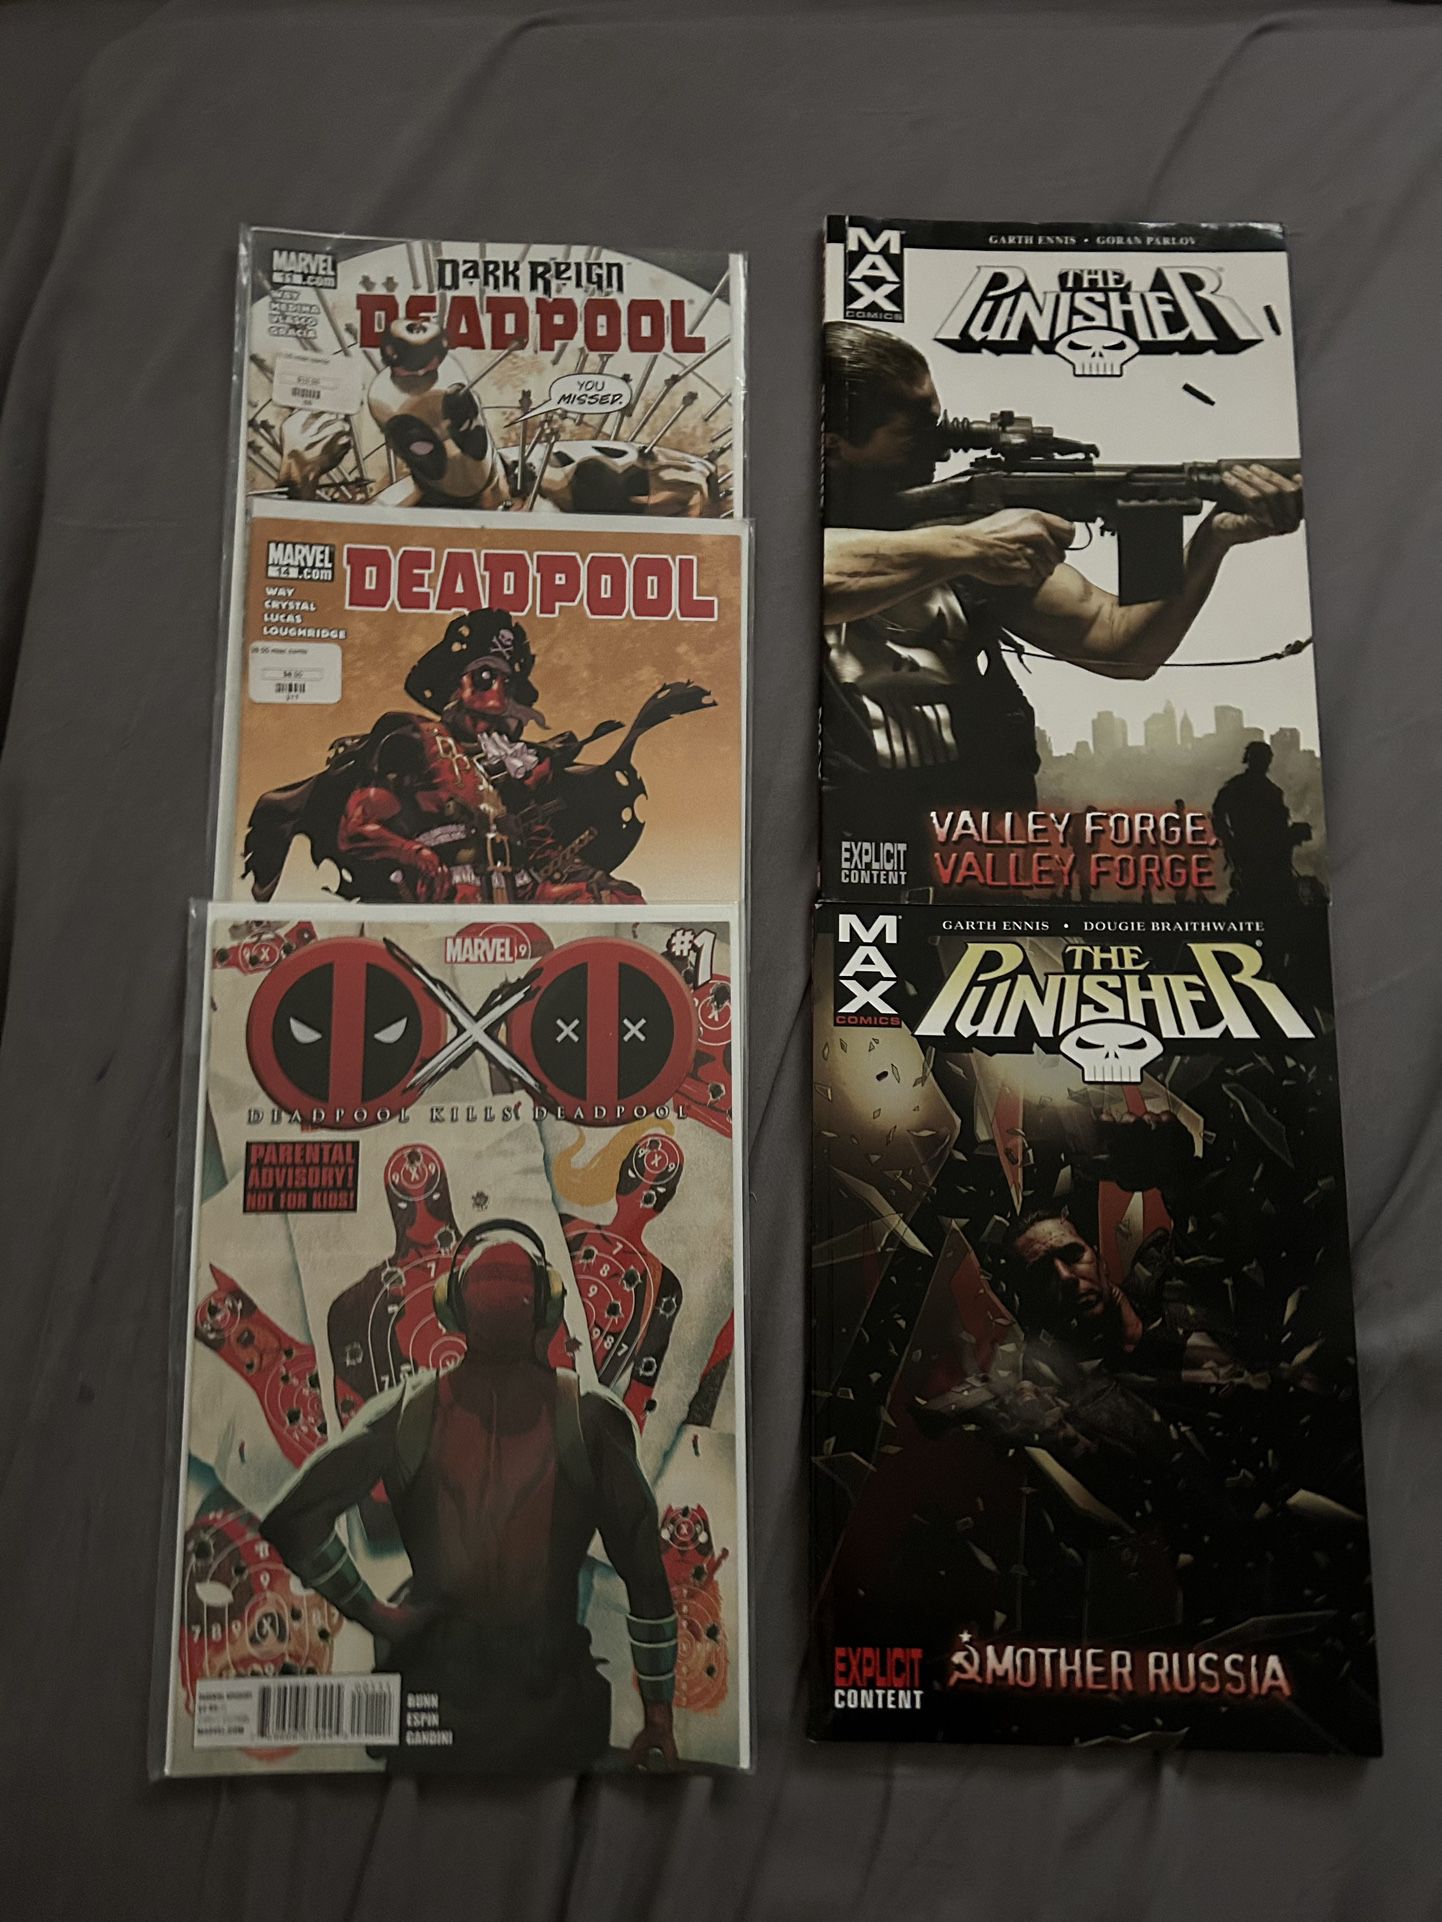 North　NV　in　COMICS　OfferUp　for　Las　Sale　Vegas,　DEADPOOL　PUNISHER